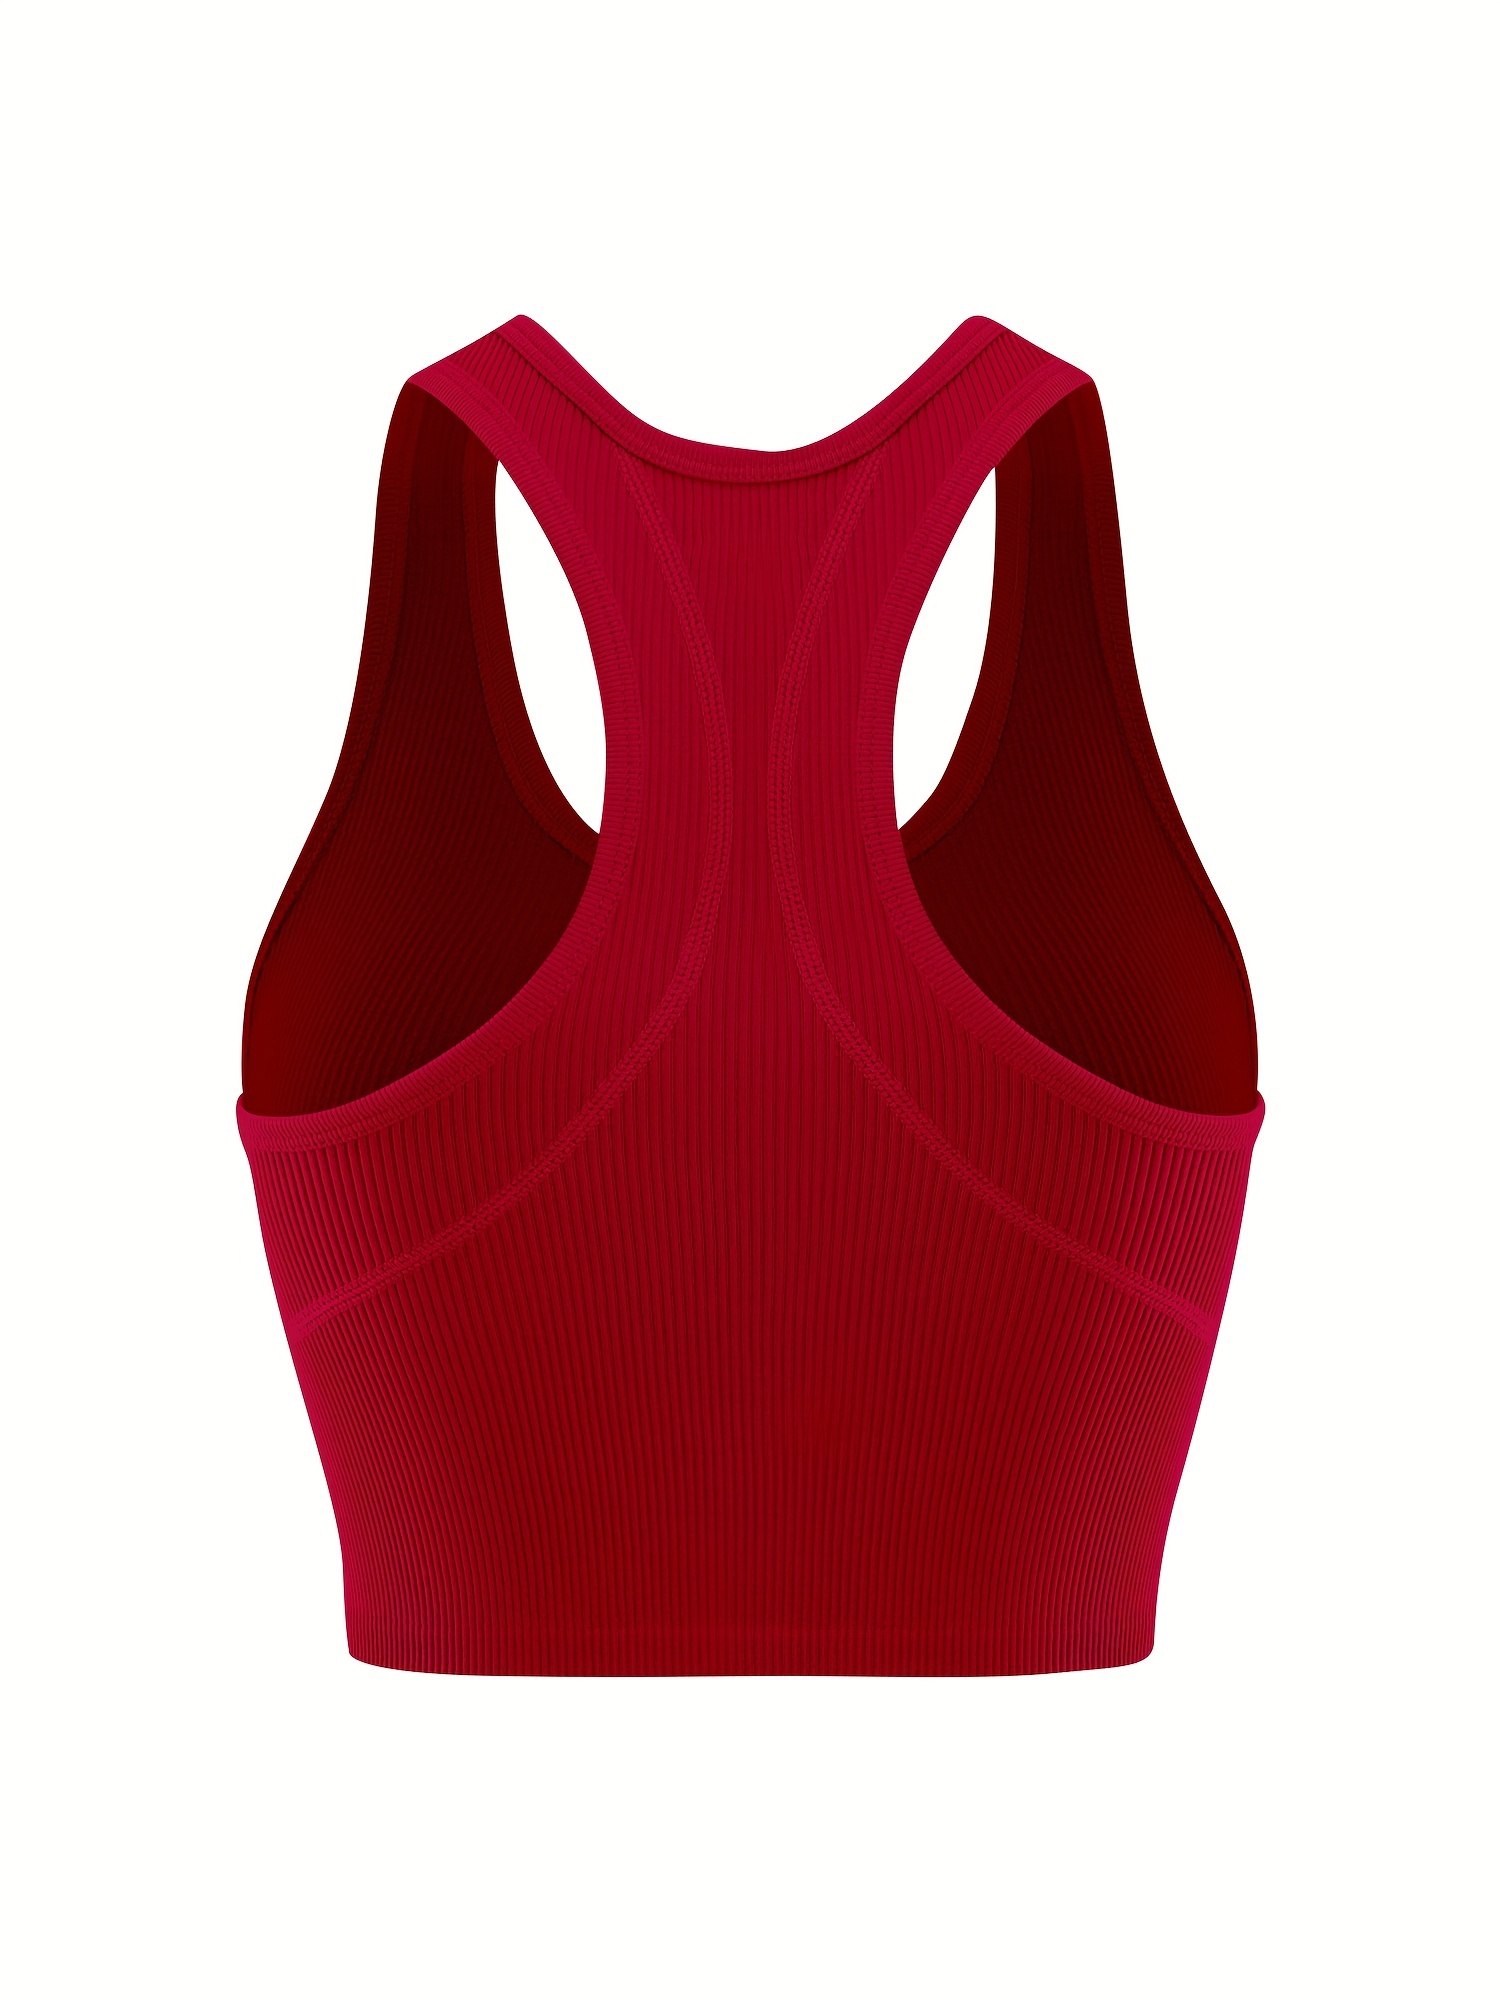 7 COLORS NWT Brighter Color Racerback Sport Fitness Crop Tops Built in Bra  Yoga Sleeveless Vest